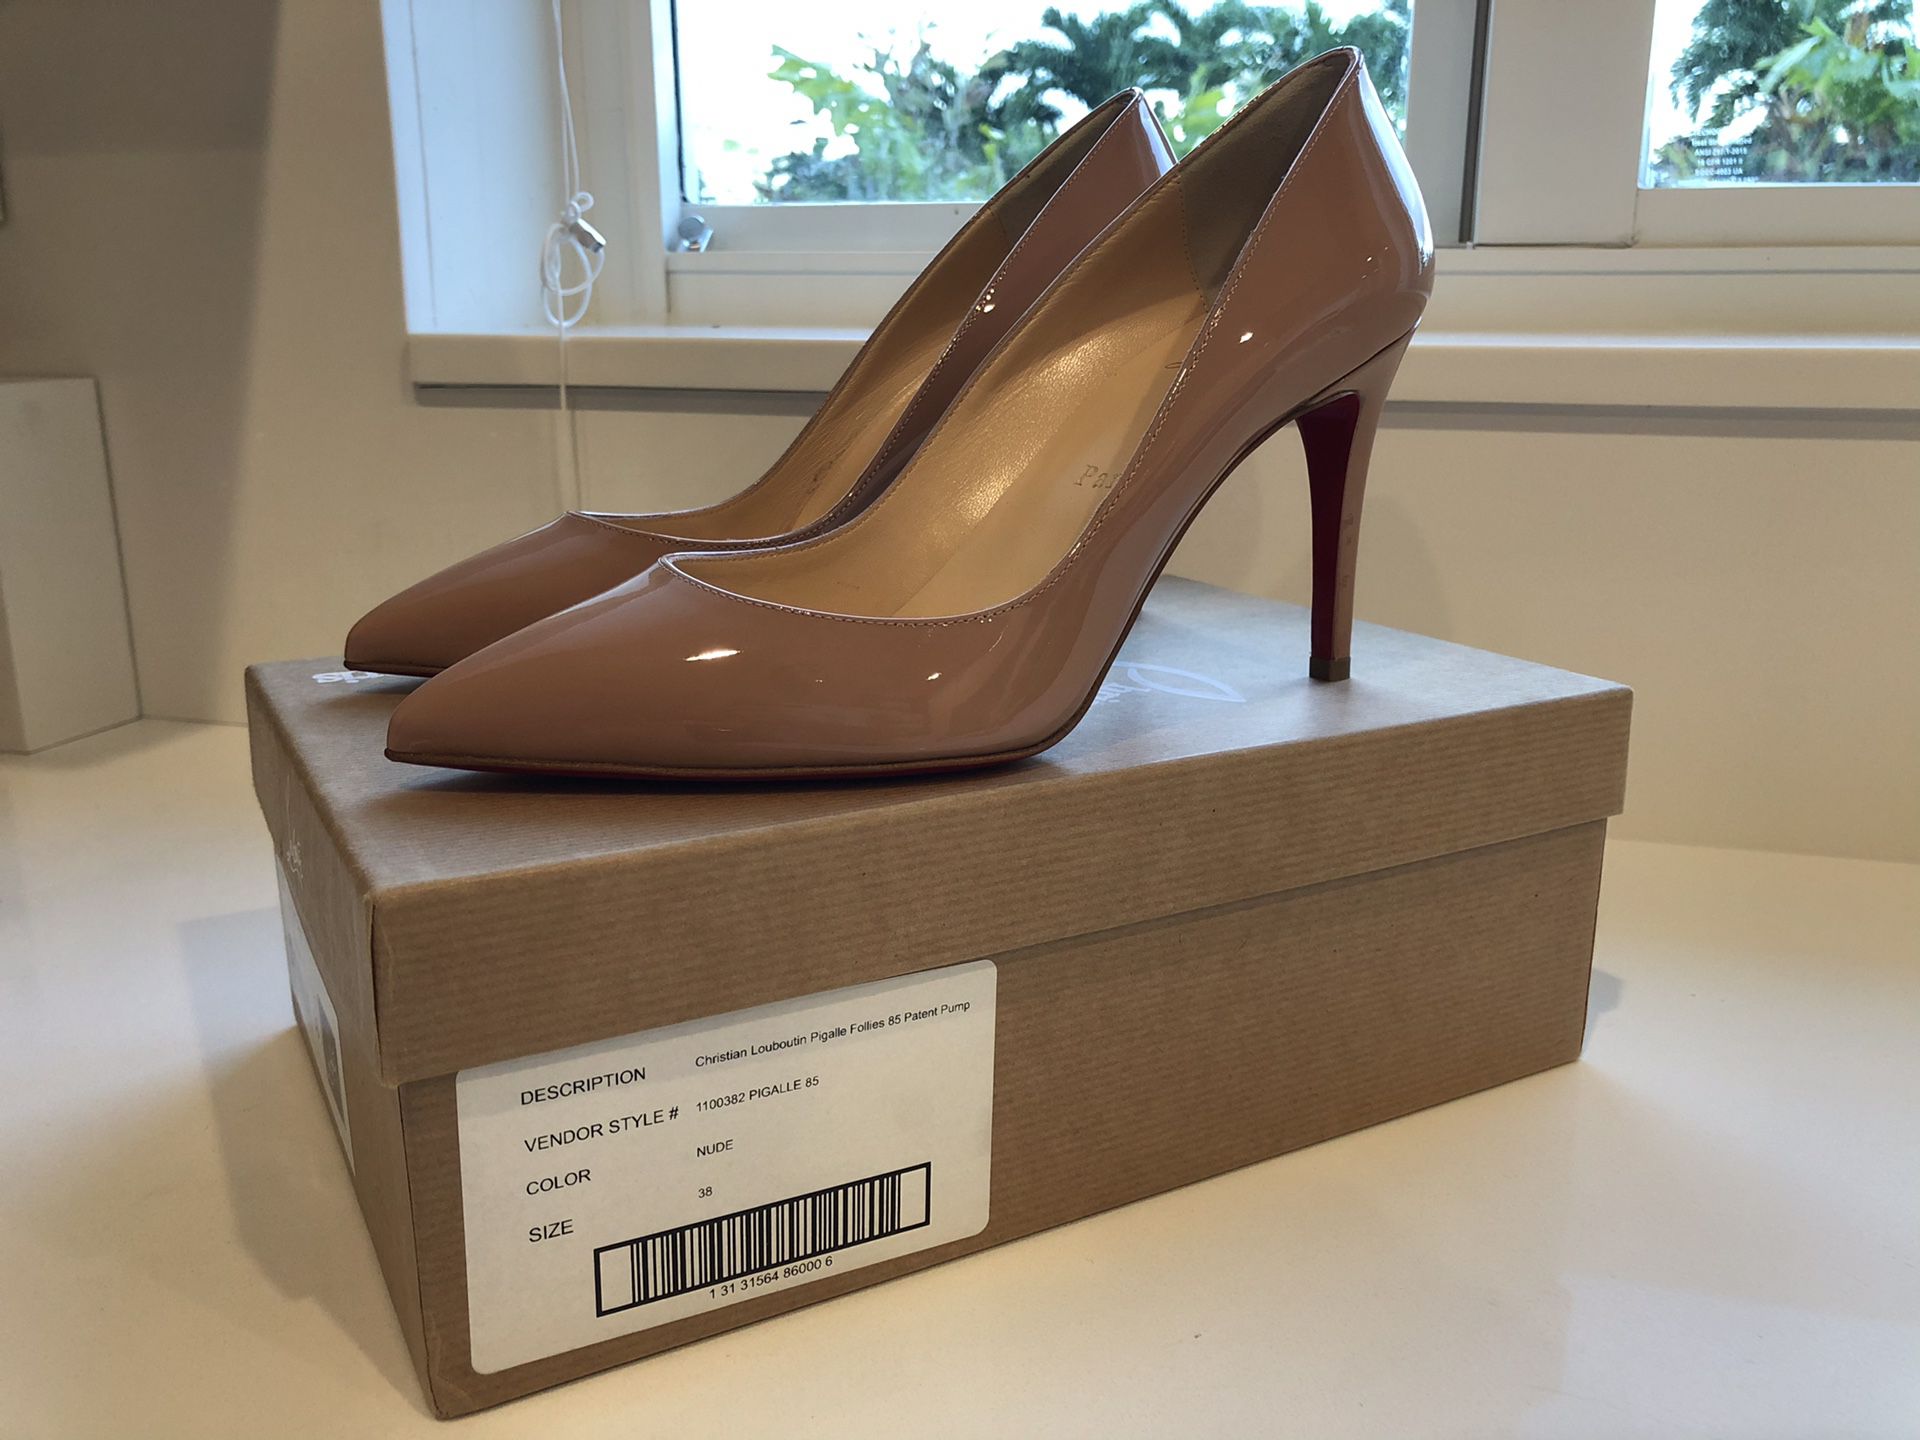 REDUCED! Christian Louboutin Pigalle 85- brand new, never worn!